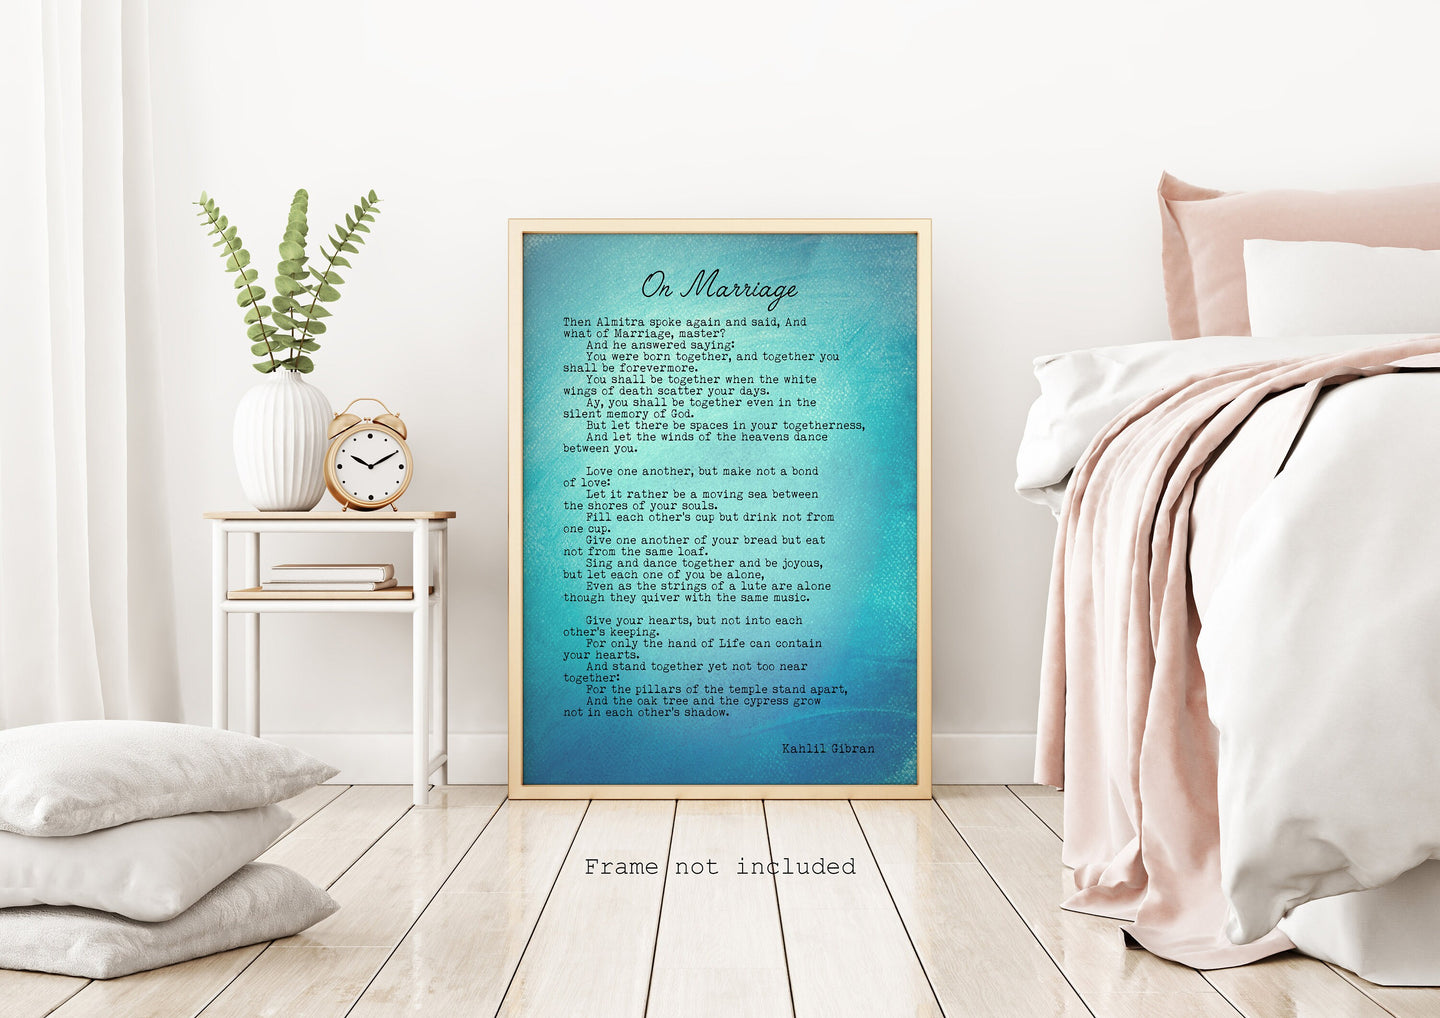 On Marriage Kahlil Gibran Poem - Art Print Home office Decor poetry wall art UNFRAMED